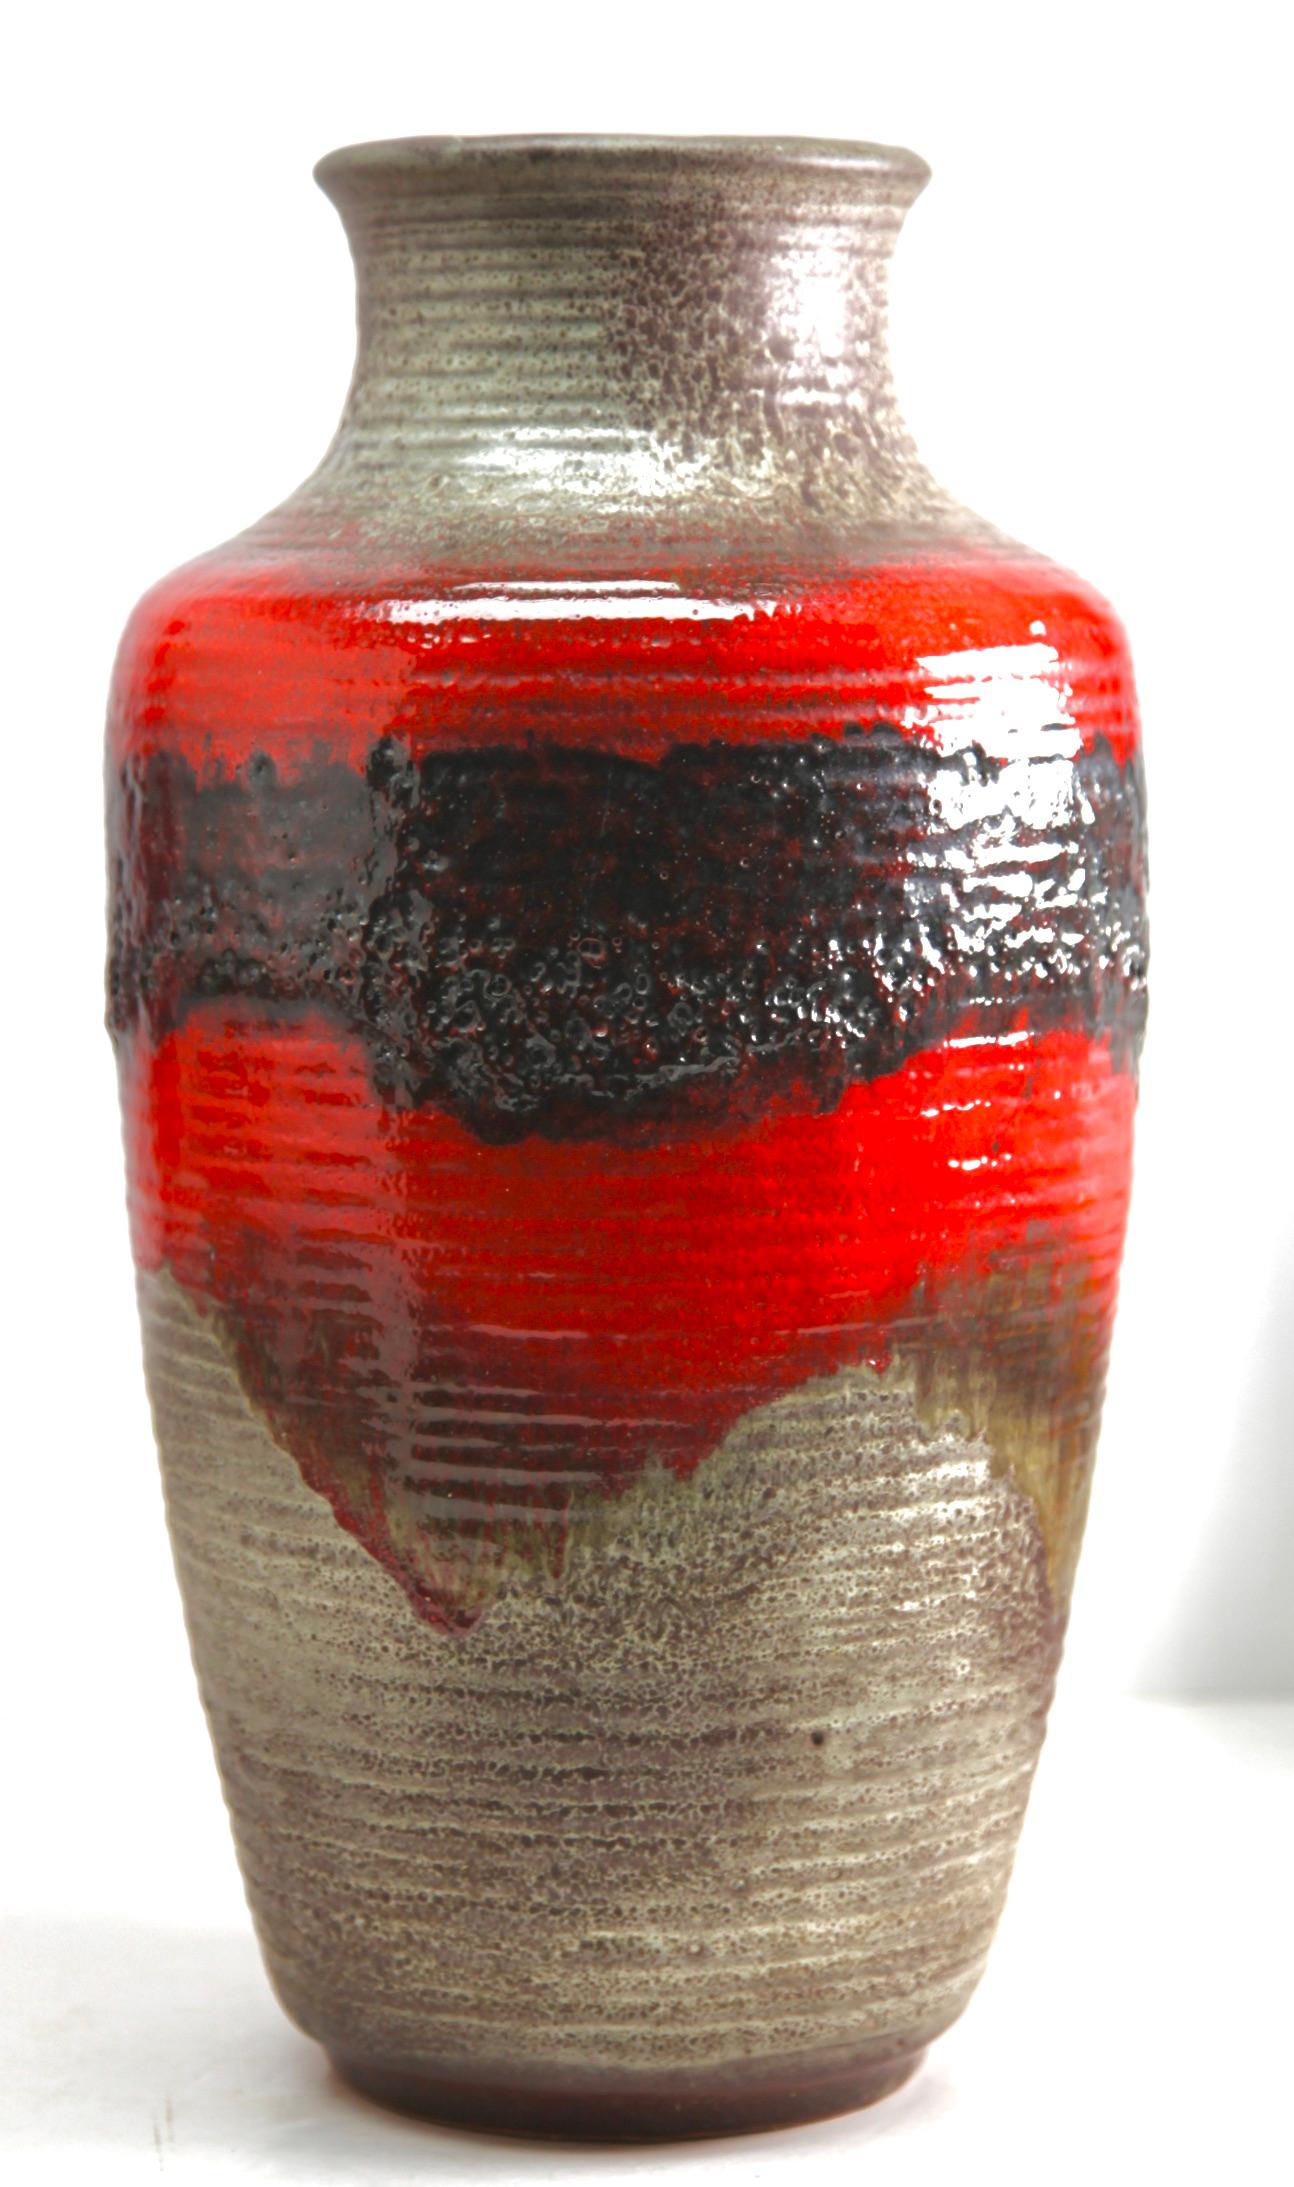 Carstens Tonnieshof
Classic fat lava red drip-glaze on charcoal background. Floor vase 
Glazed pottery.
Stamped on the base. 7901-45 W-Germany.
Measures: 46 x 24 cm 4.3 kg
The piece is in excellent condition and a real beauty.
  
   
   